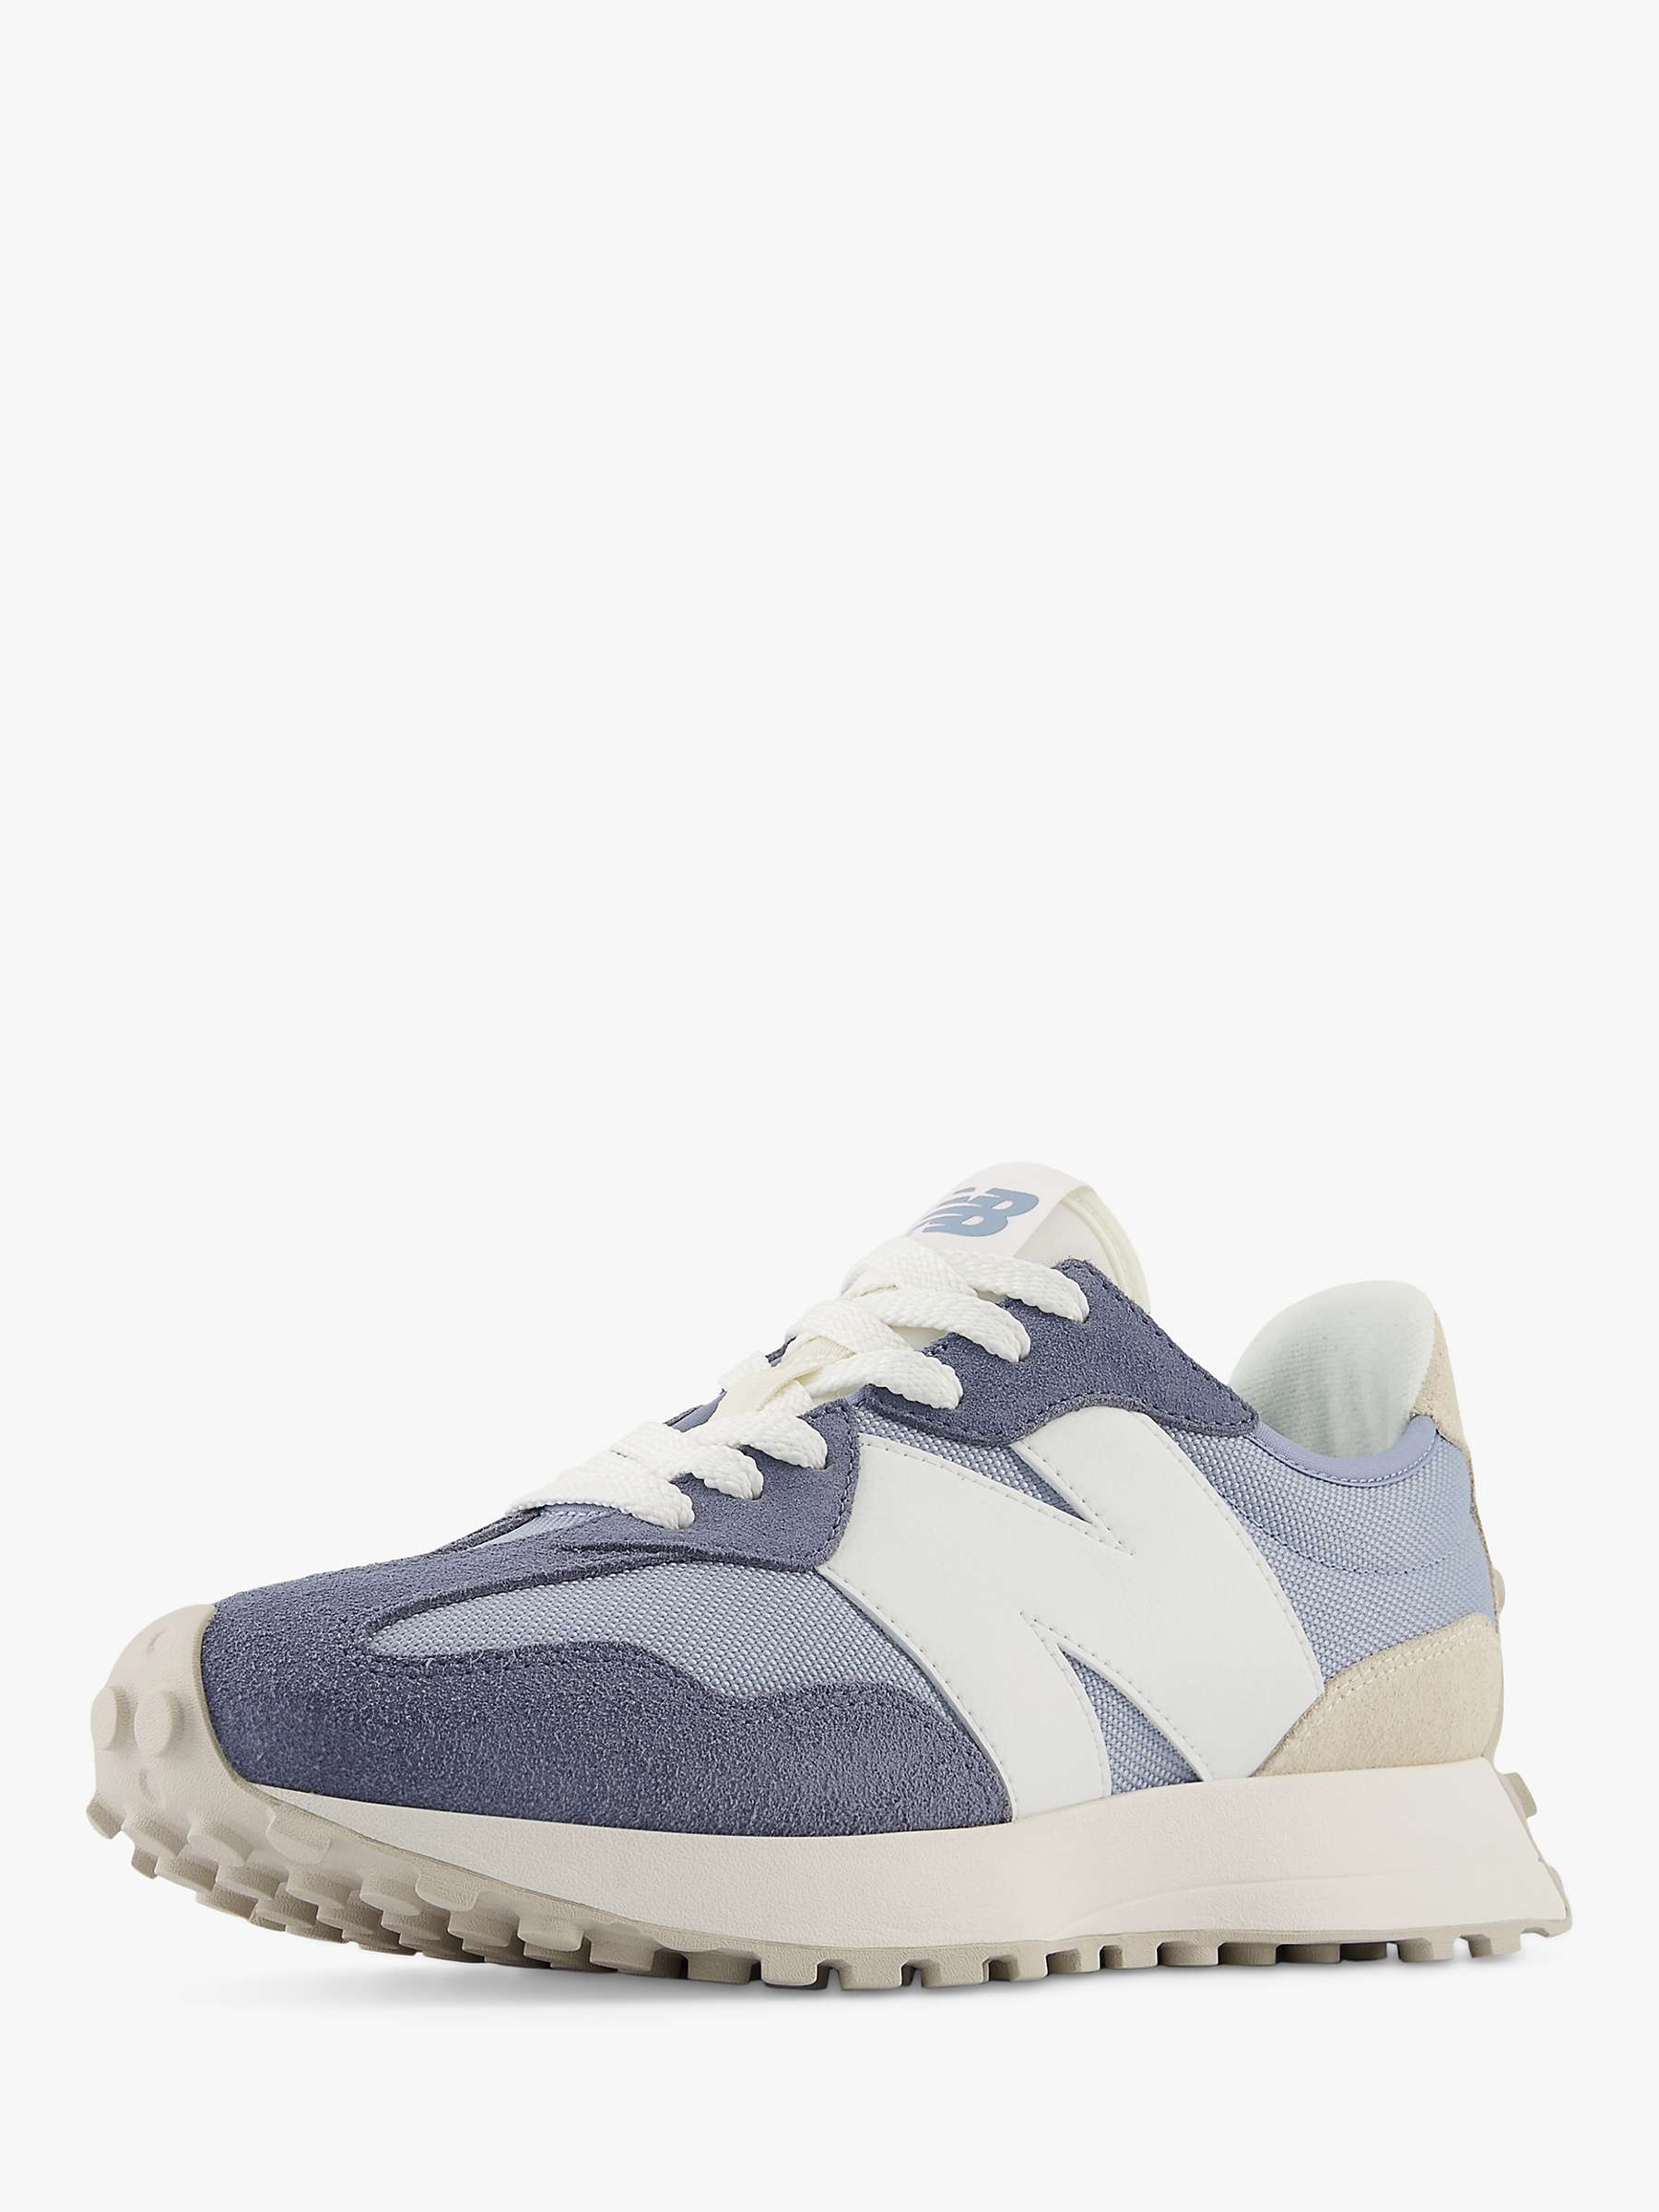 Buy New Balance 327 Suede Mesh Trainers Online at johnlewis.com